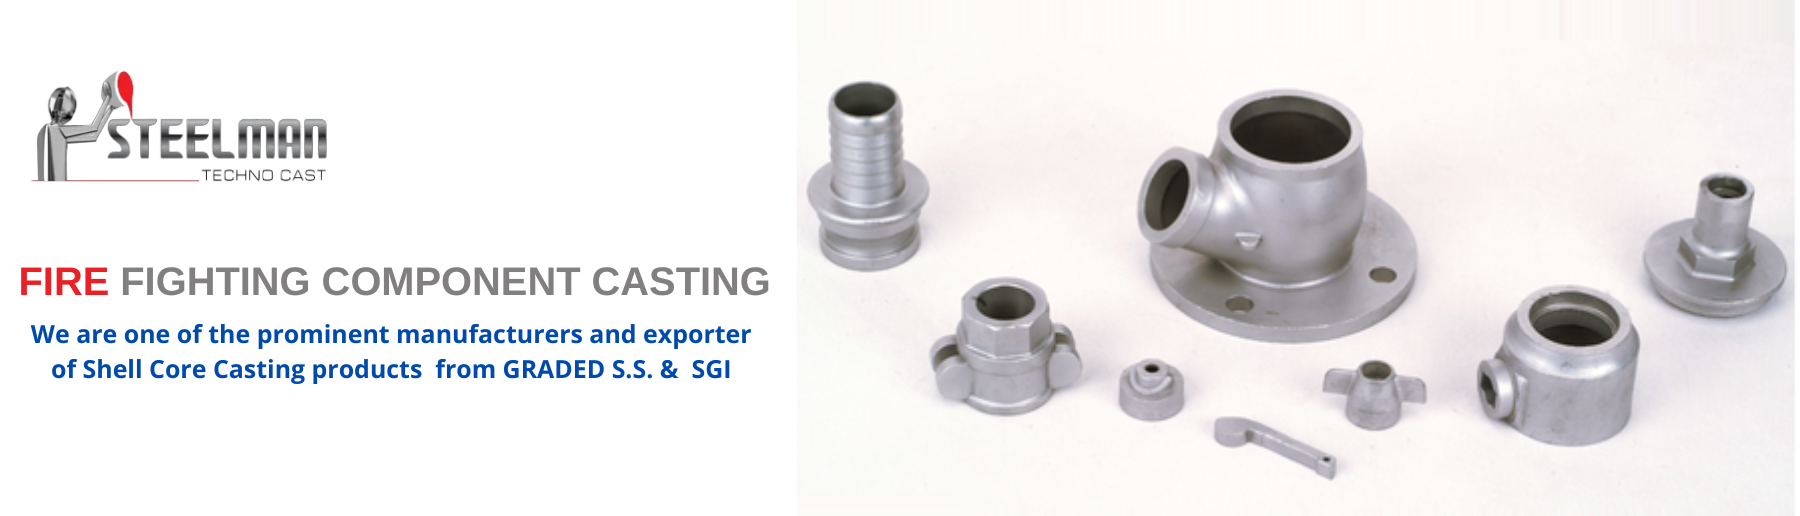 FIRE FIGHTING COMPONENT CASTING